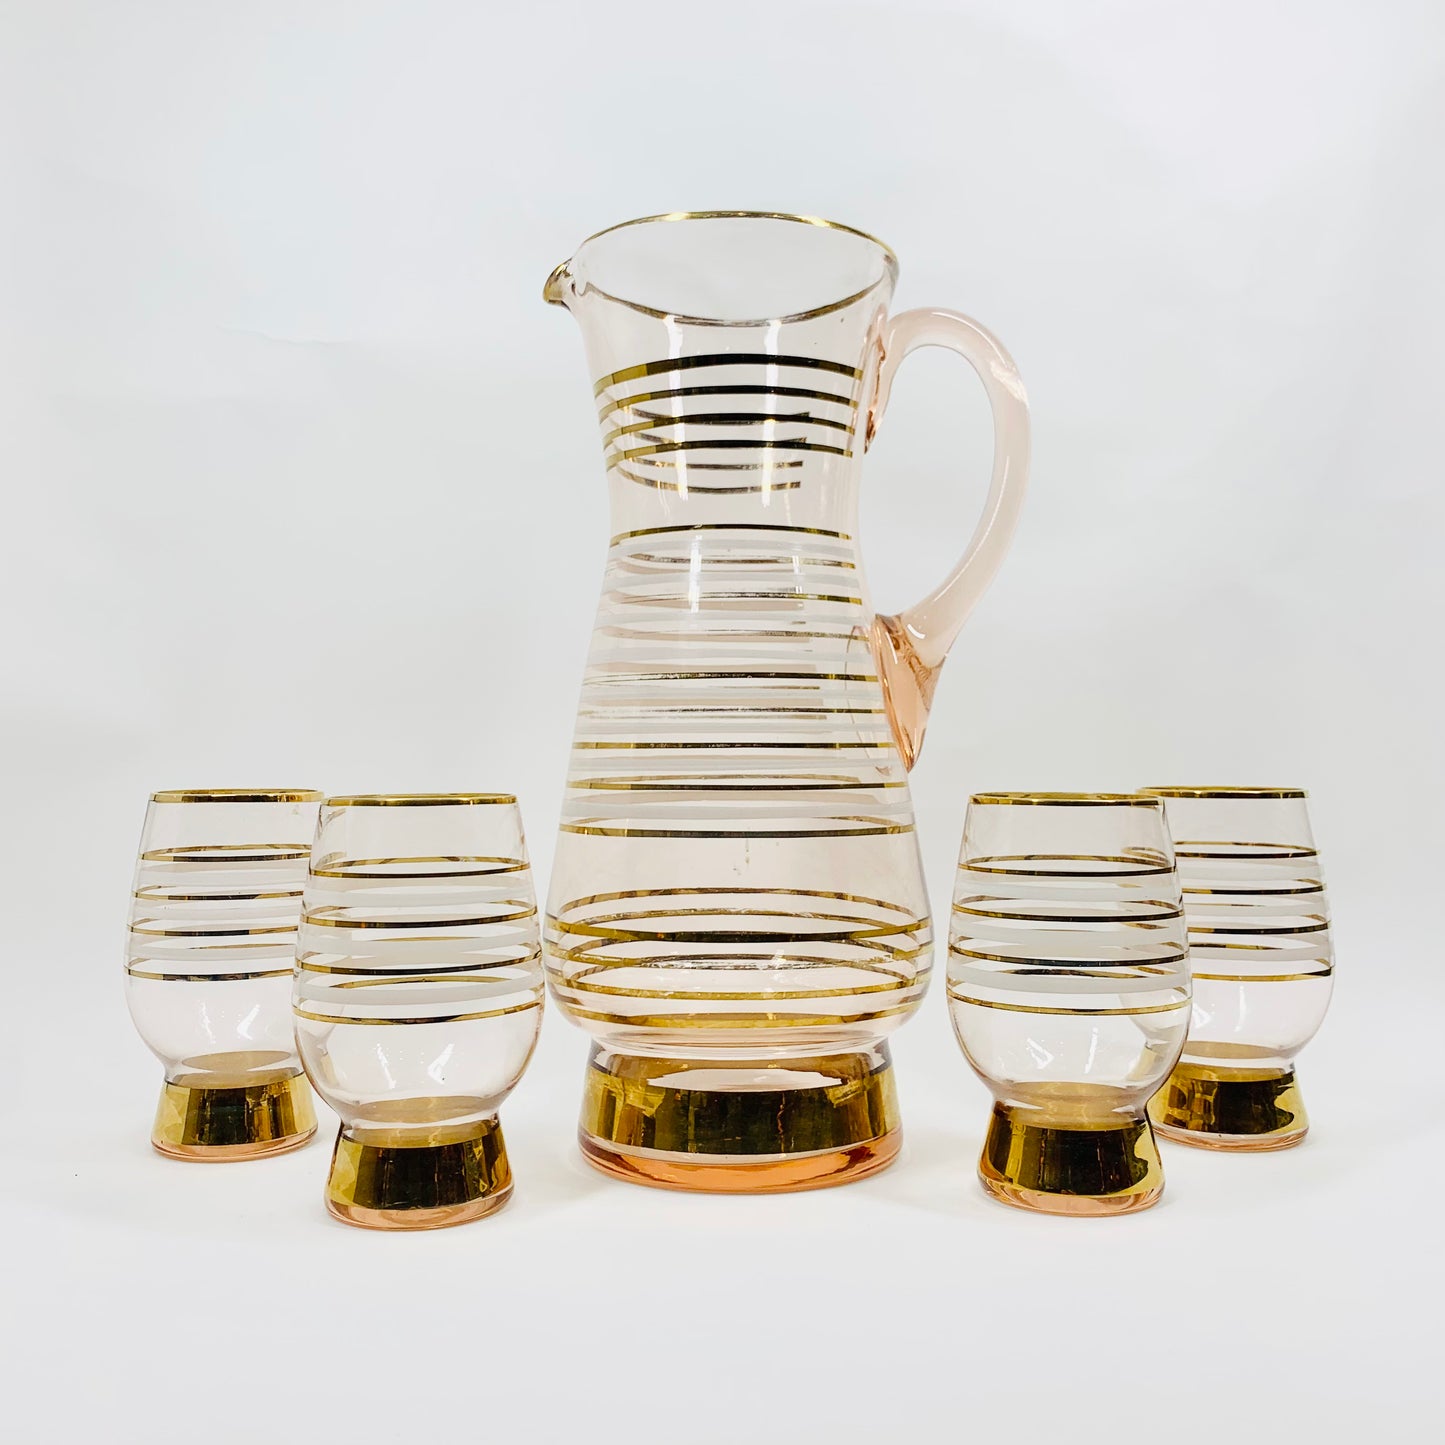 Midcentury complete set of pink glass with gold gilding jug and matching glasses